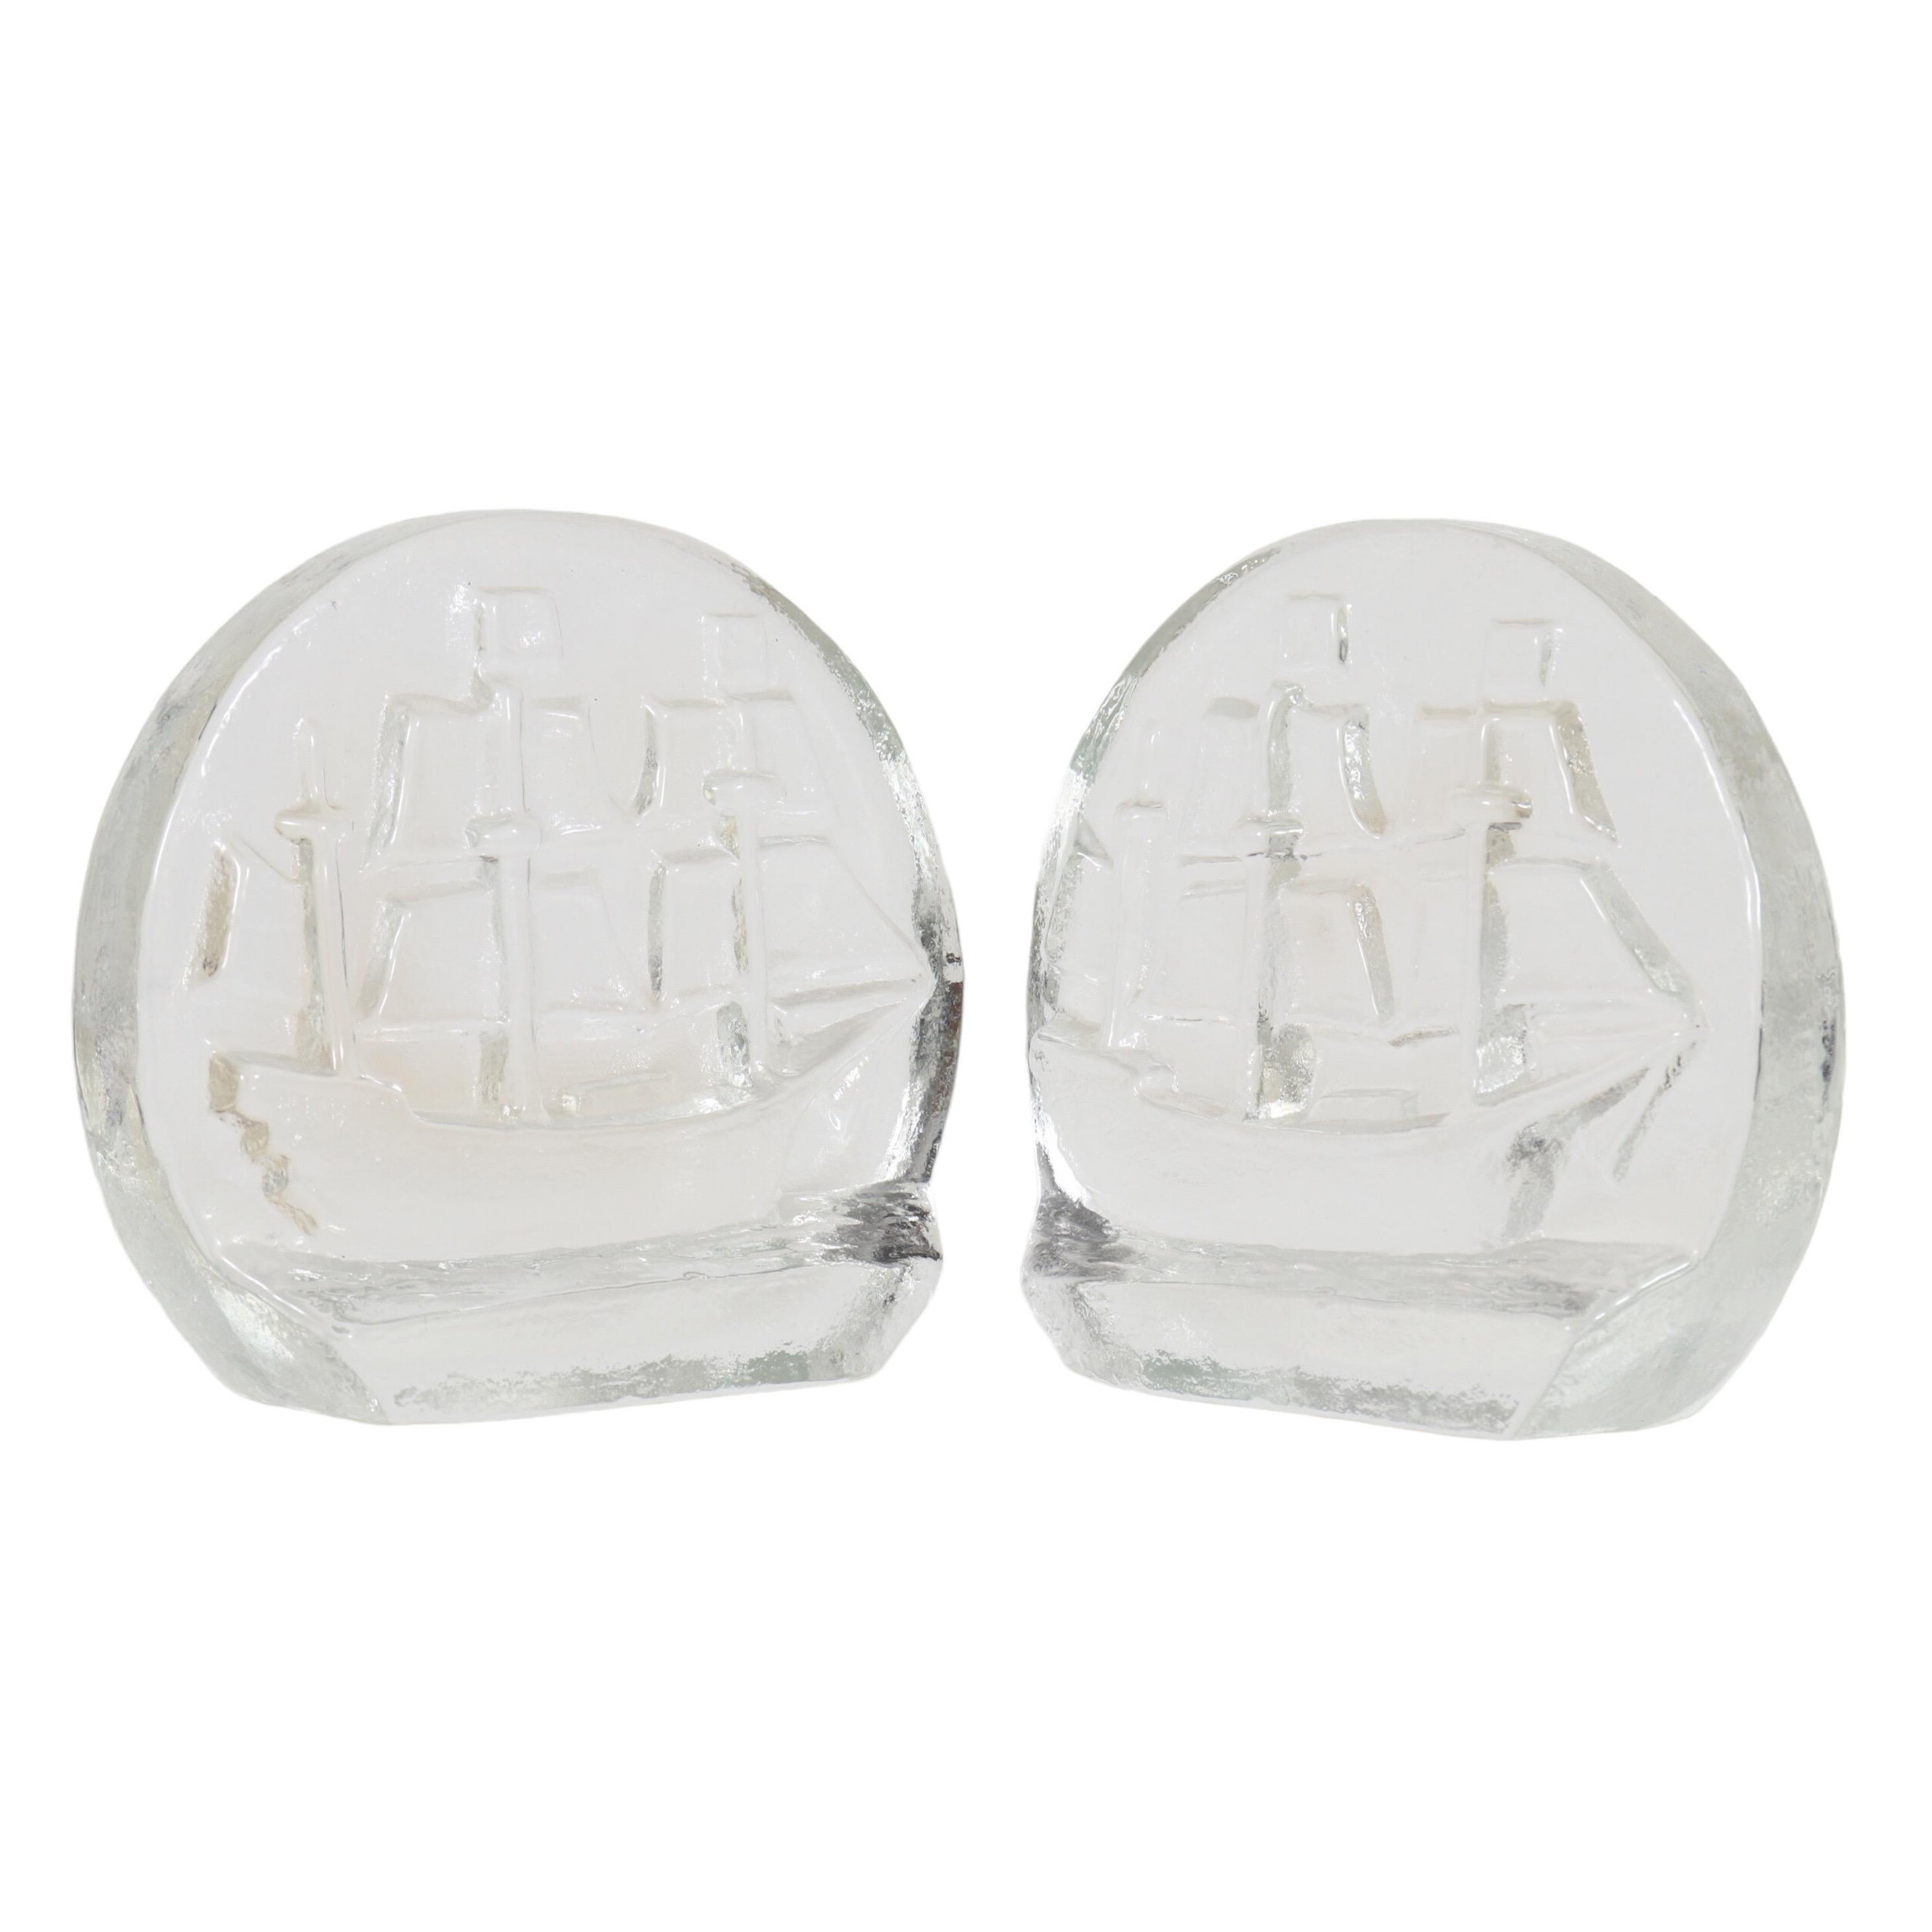 Blenko Glass Ship Bookends, a Pair For Sale